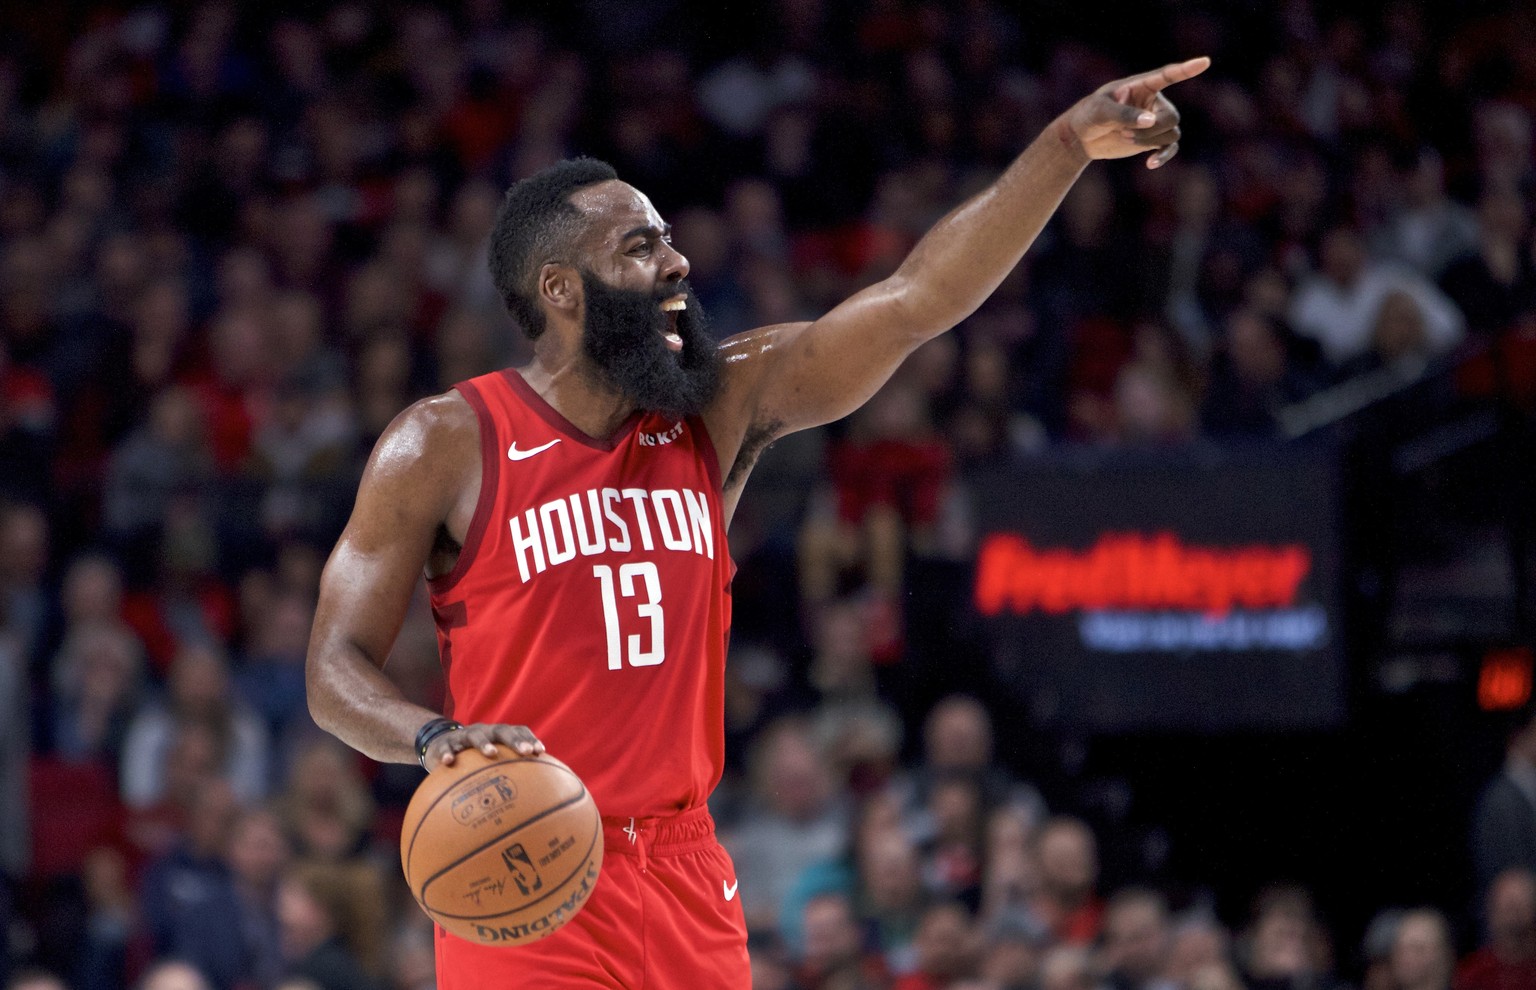 Houston Rockets guard James Harden gestures during the first half of an NBA basketball game against the Portland Trail Blazers in Portland, Ore., Saturday, Jan. 5, 2019. (AP Photo/Craig Mitchelldyer)